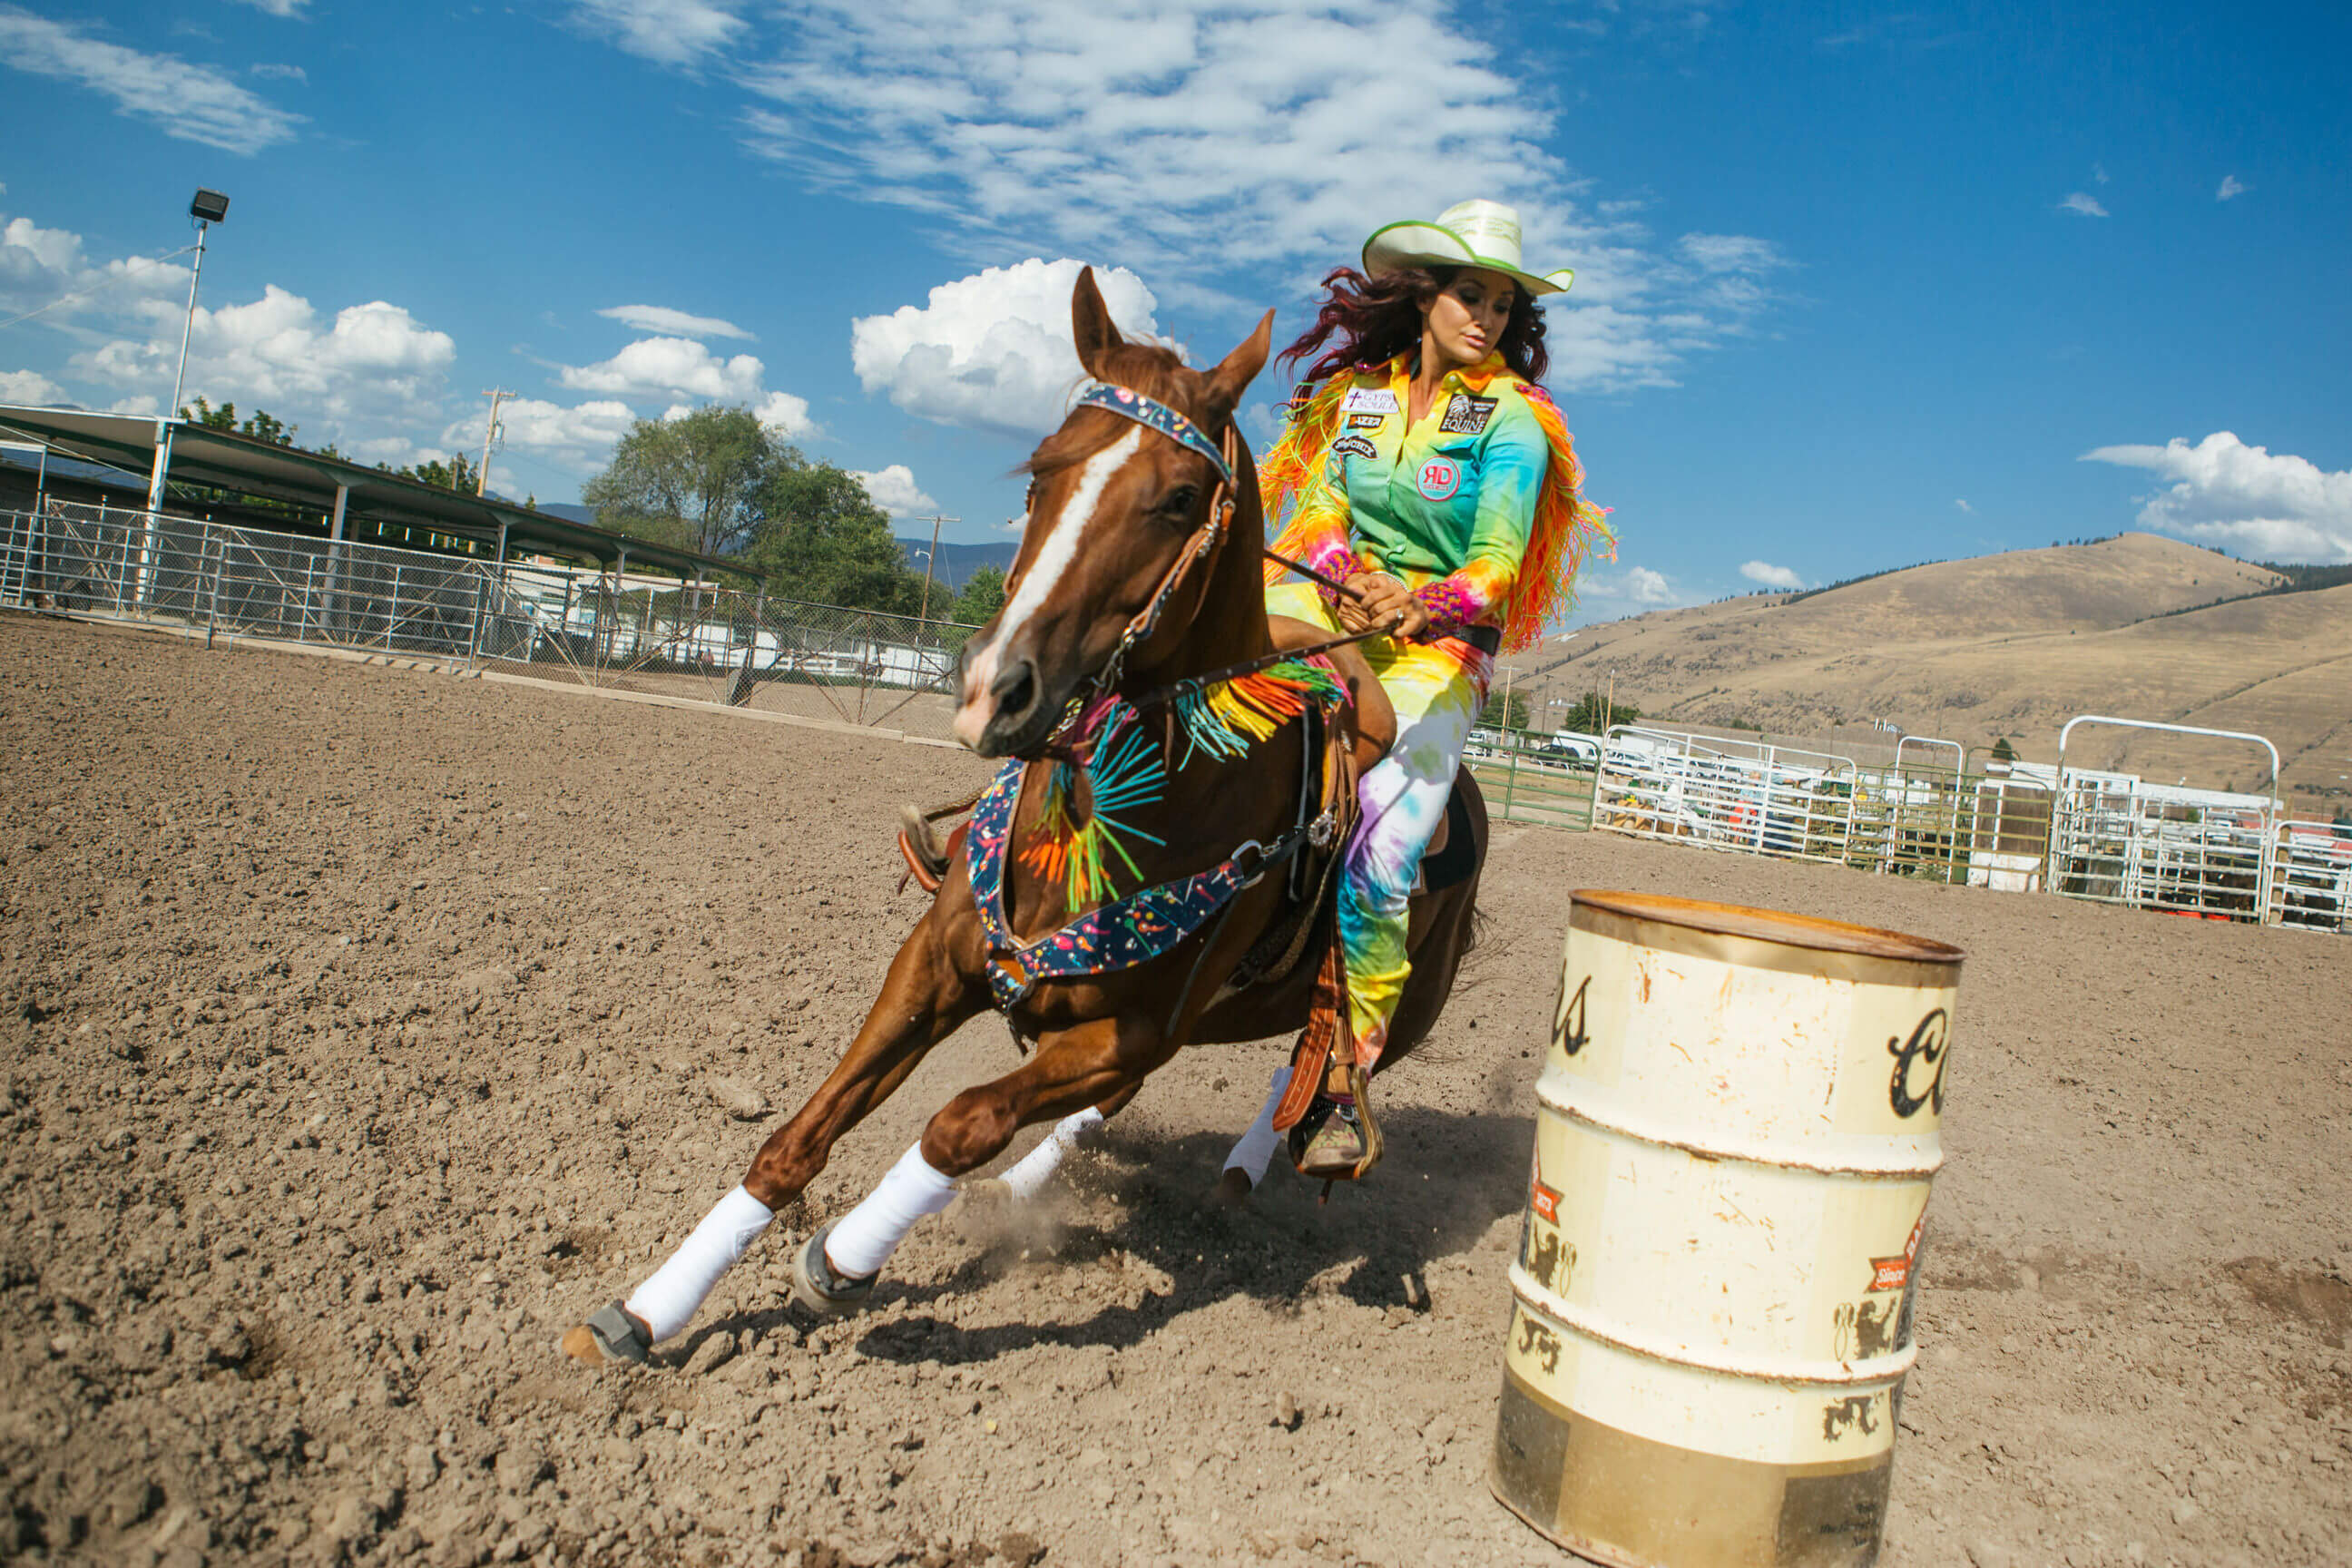 Fallon Taylor rides her horse Duty around a barrel in Missoula Montana